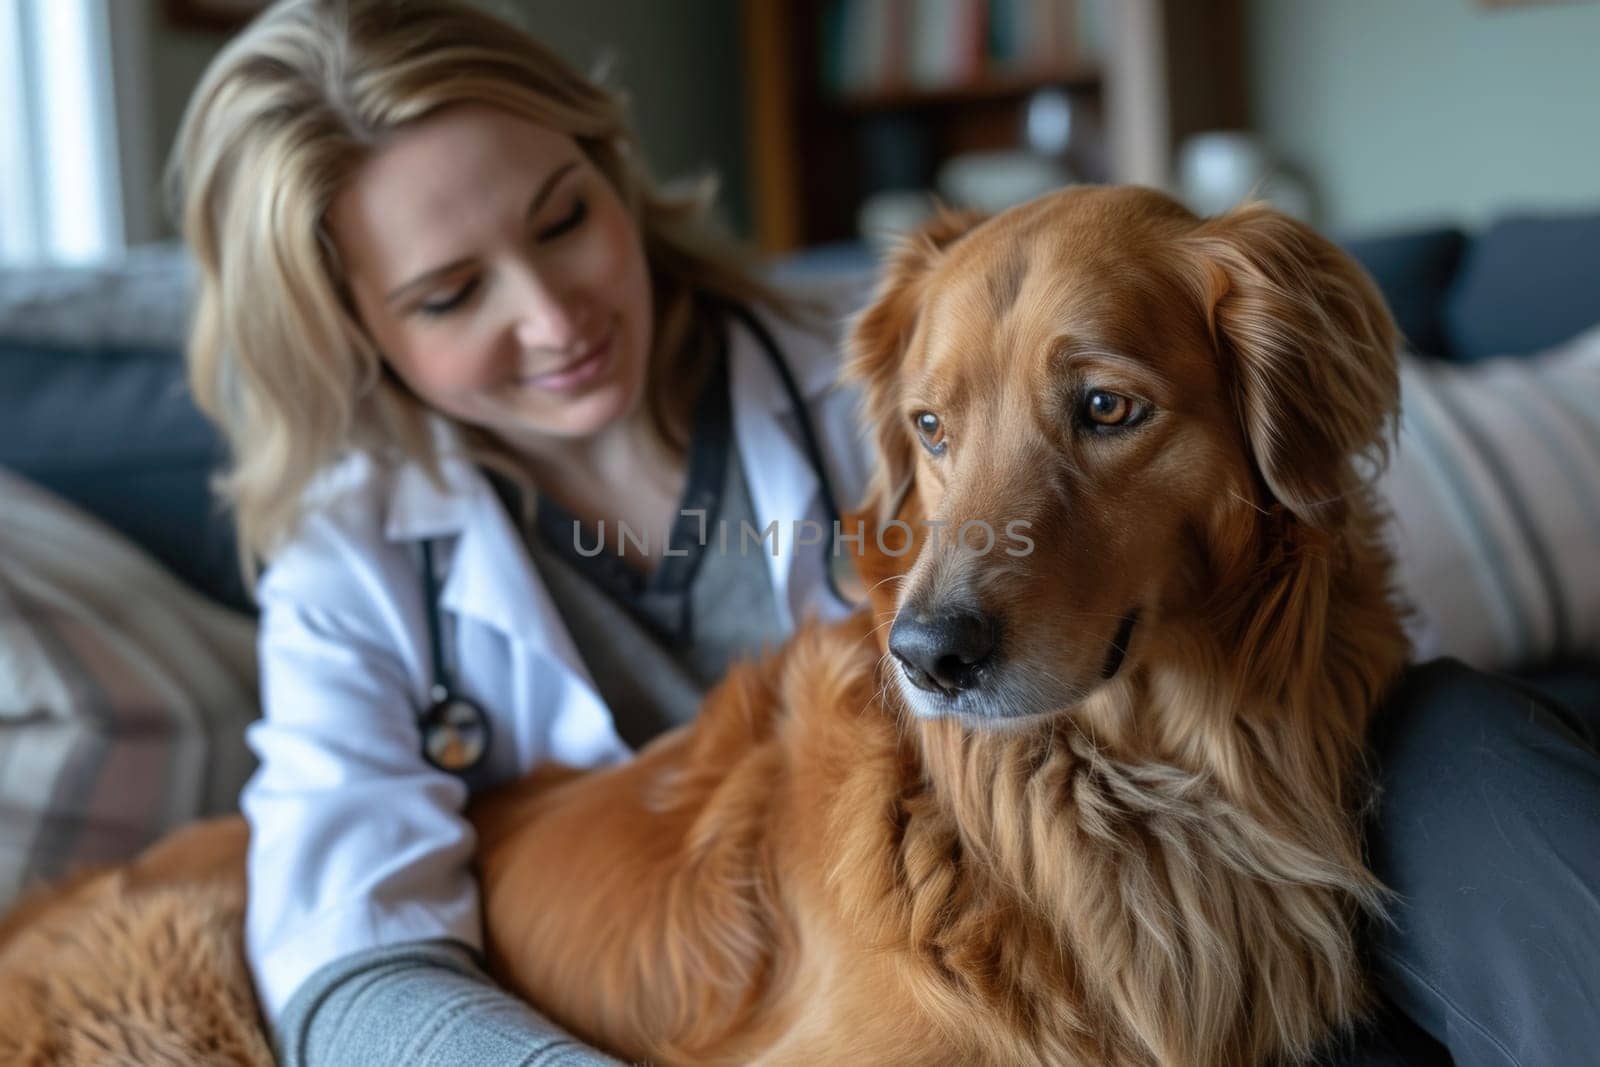 Veterinarian Home Visit: Examining and Helping Your Dog by Yurich32